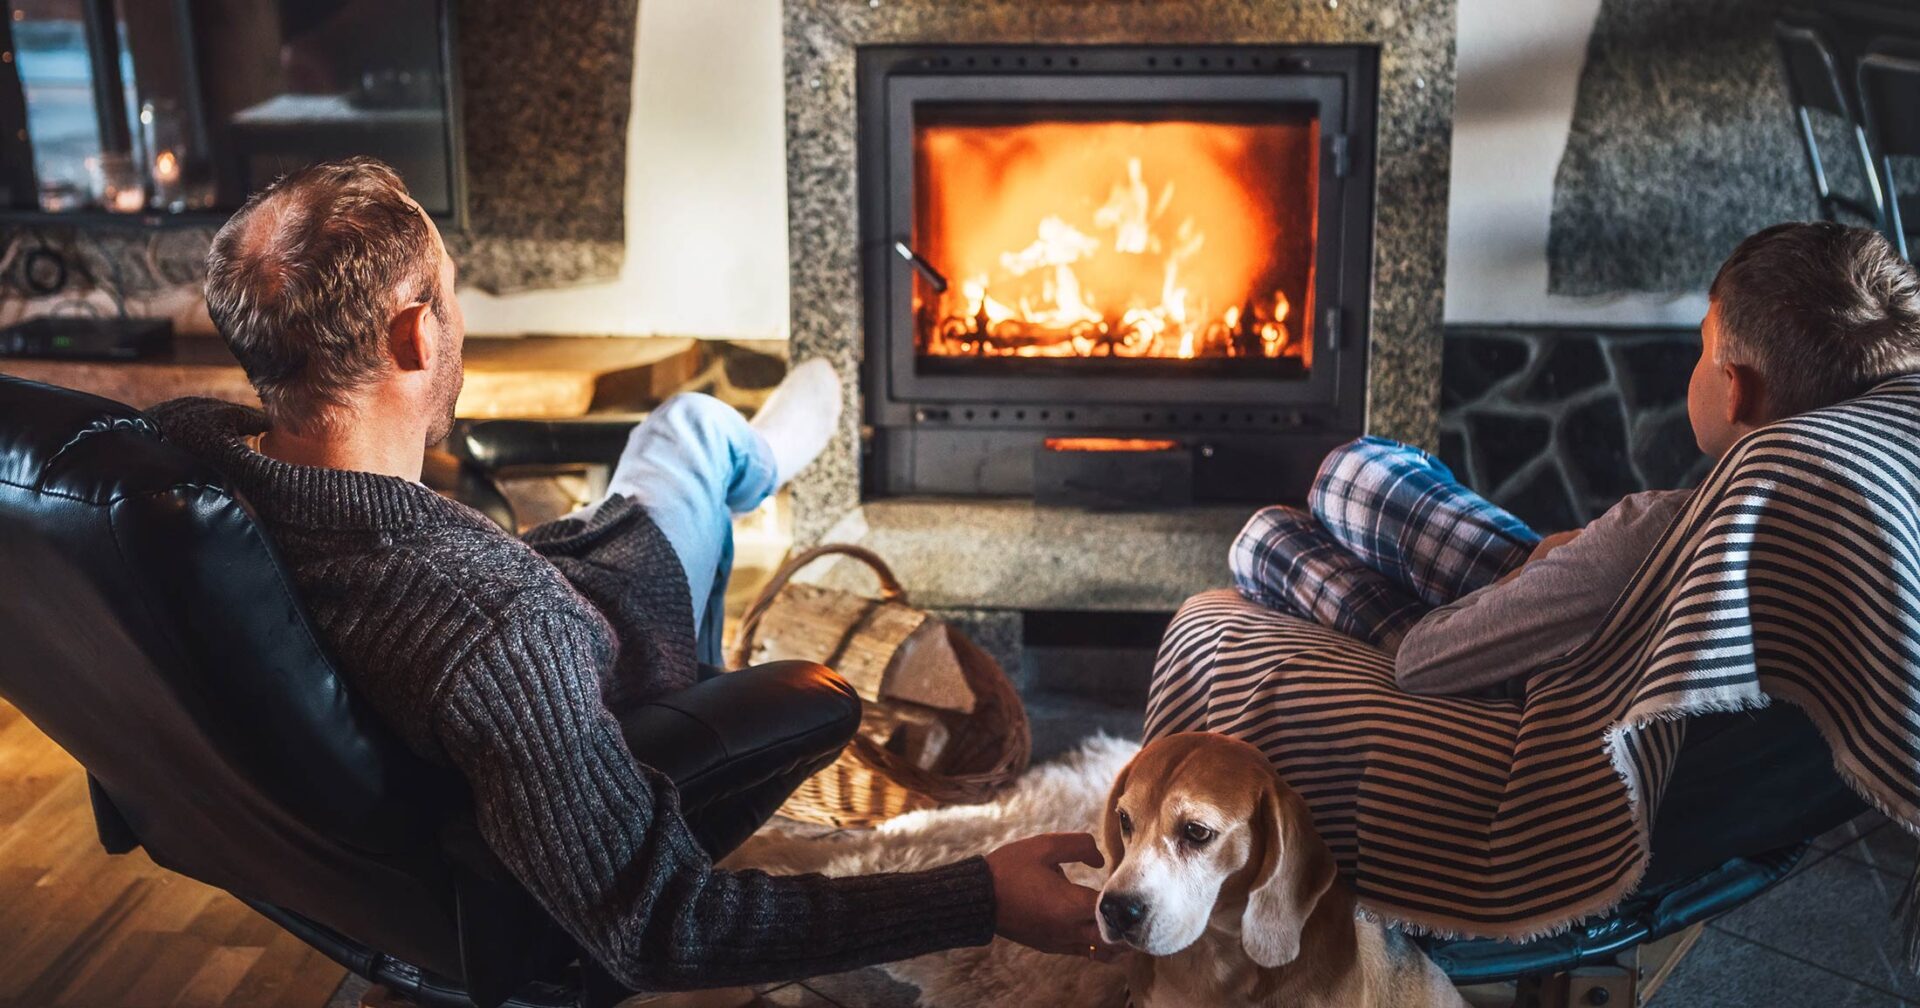 A father and son relax in front of a wood burning stove.